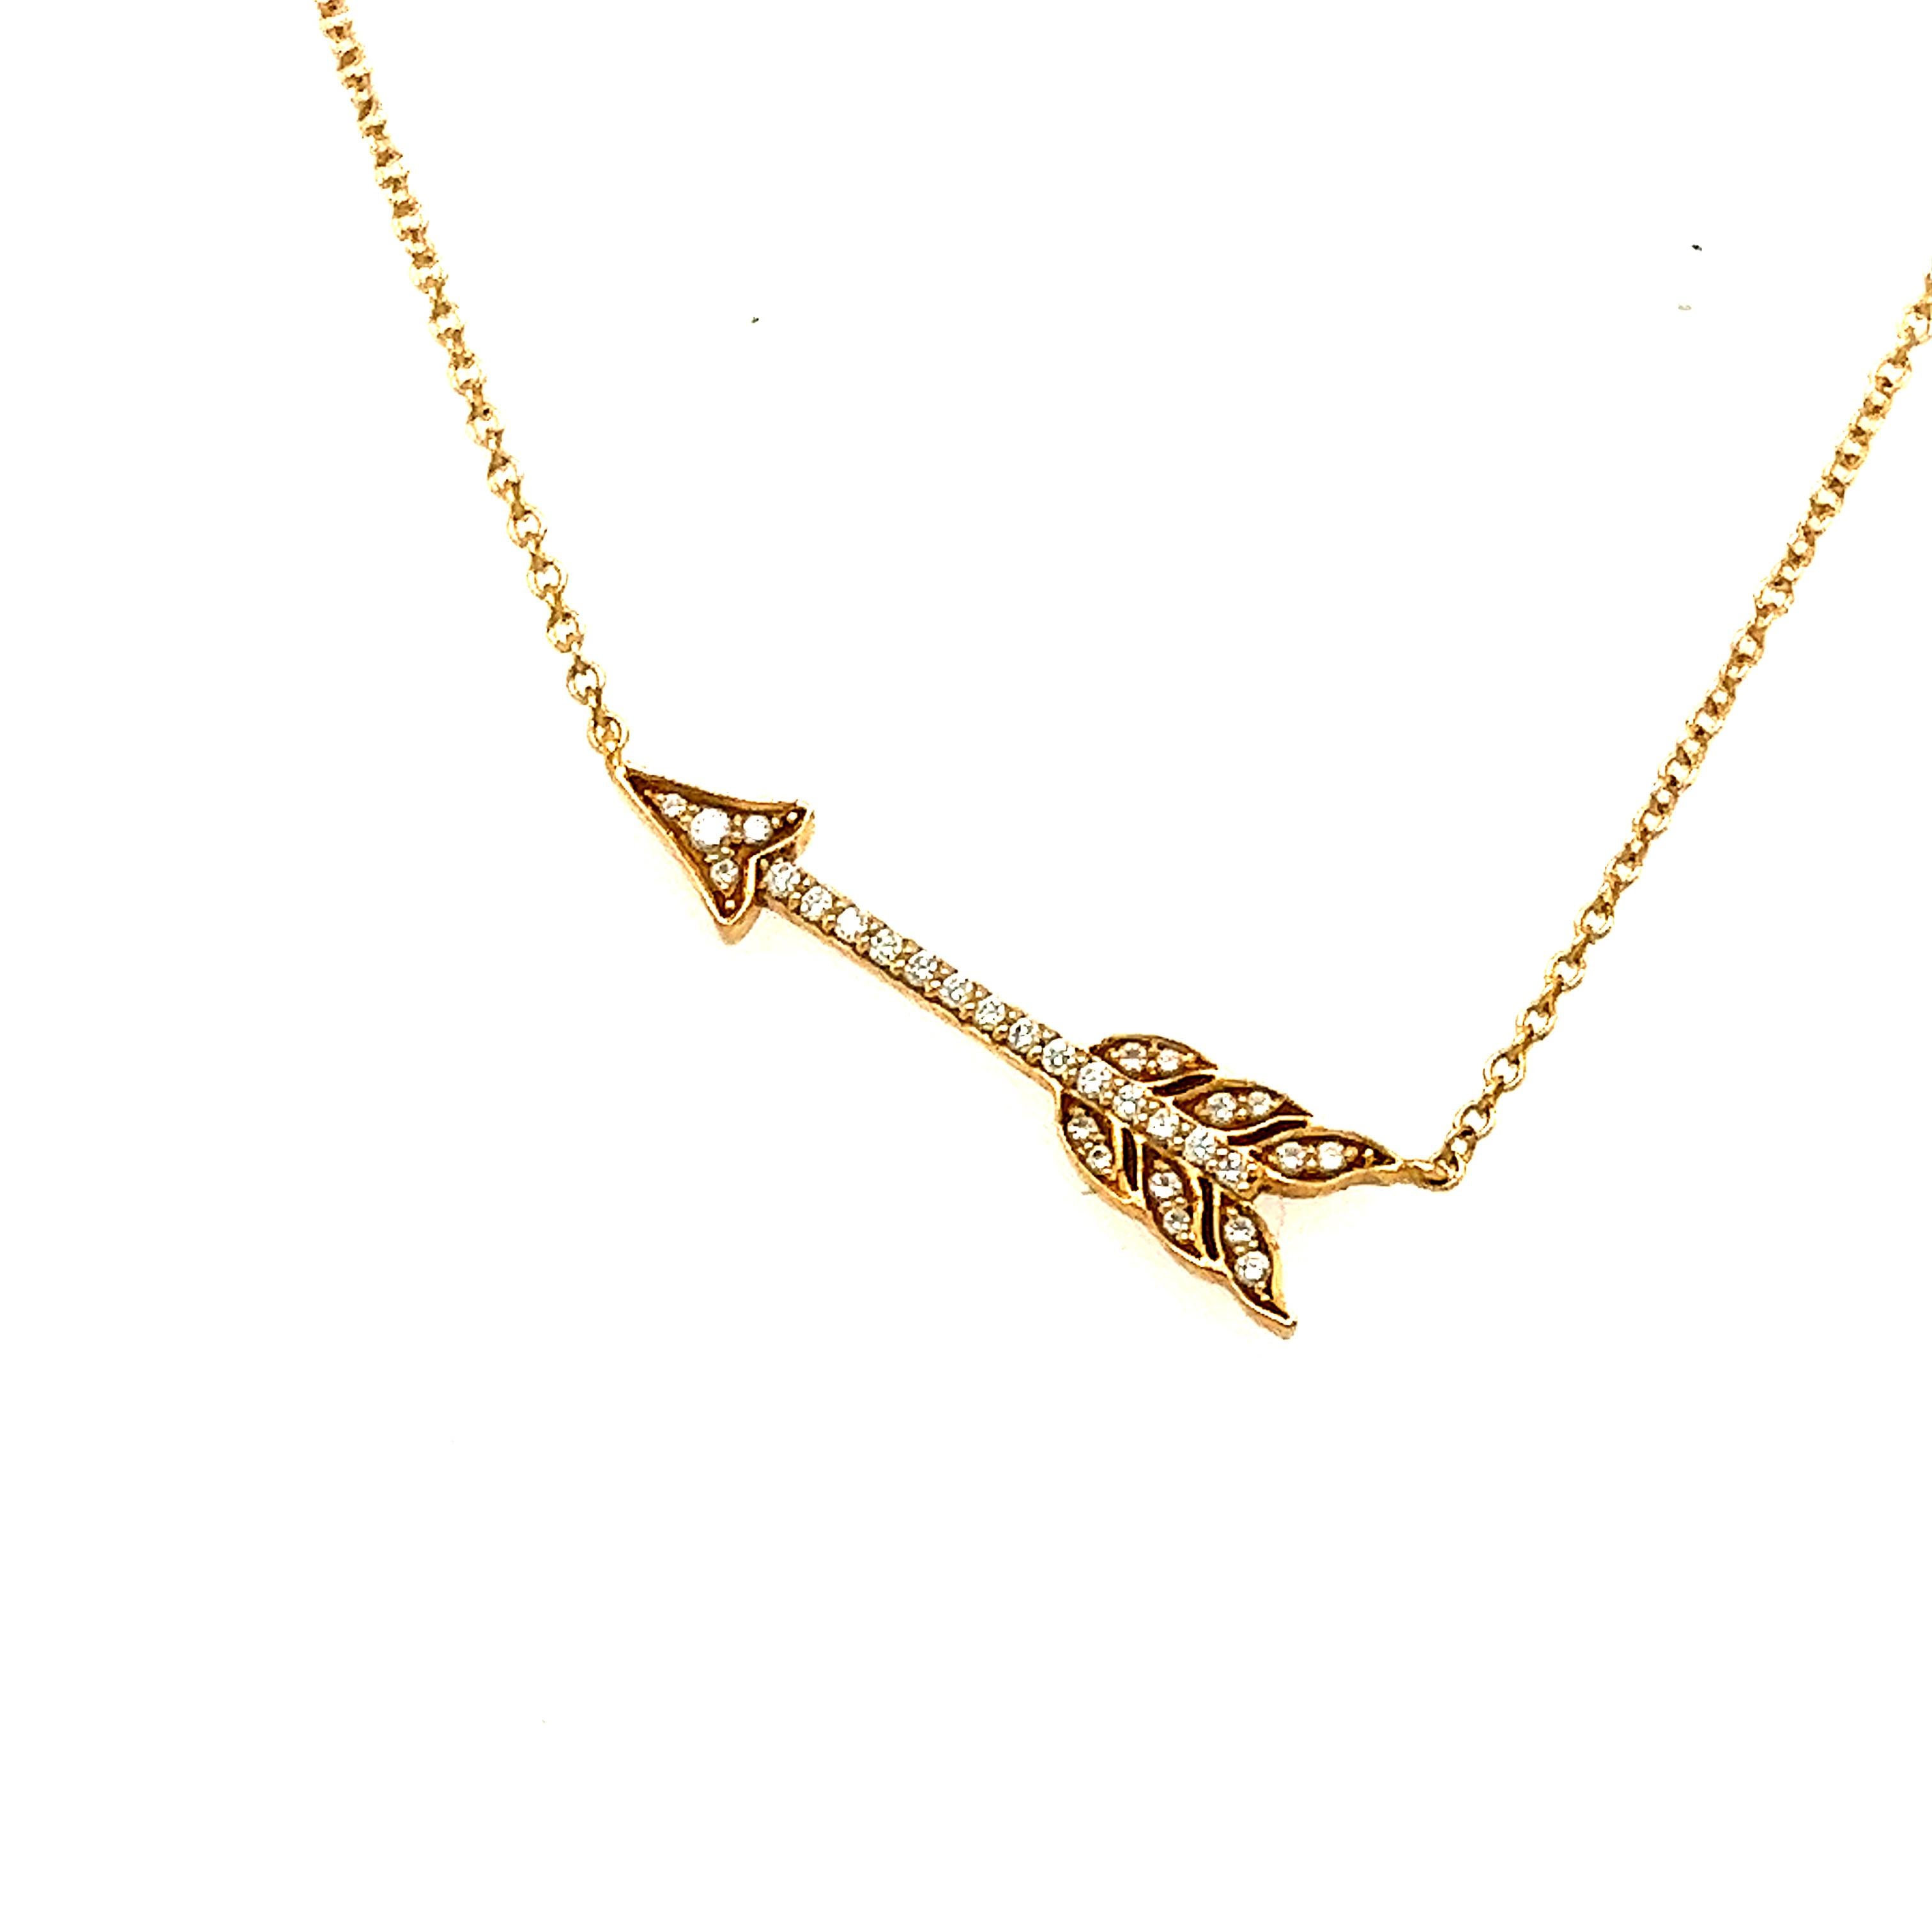 An 18k rose gold diamond pendant & necklace by Tiffany & Co. from the hearts collection. The pendant comprises of a arrow motif pave set with 30 round brilliant cut diamonds with an approximate total weight of 0.20ct. The arrow motif measures 2.30cm